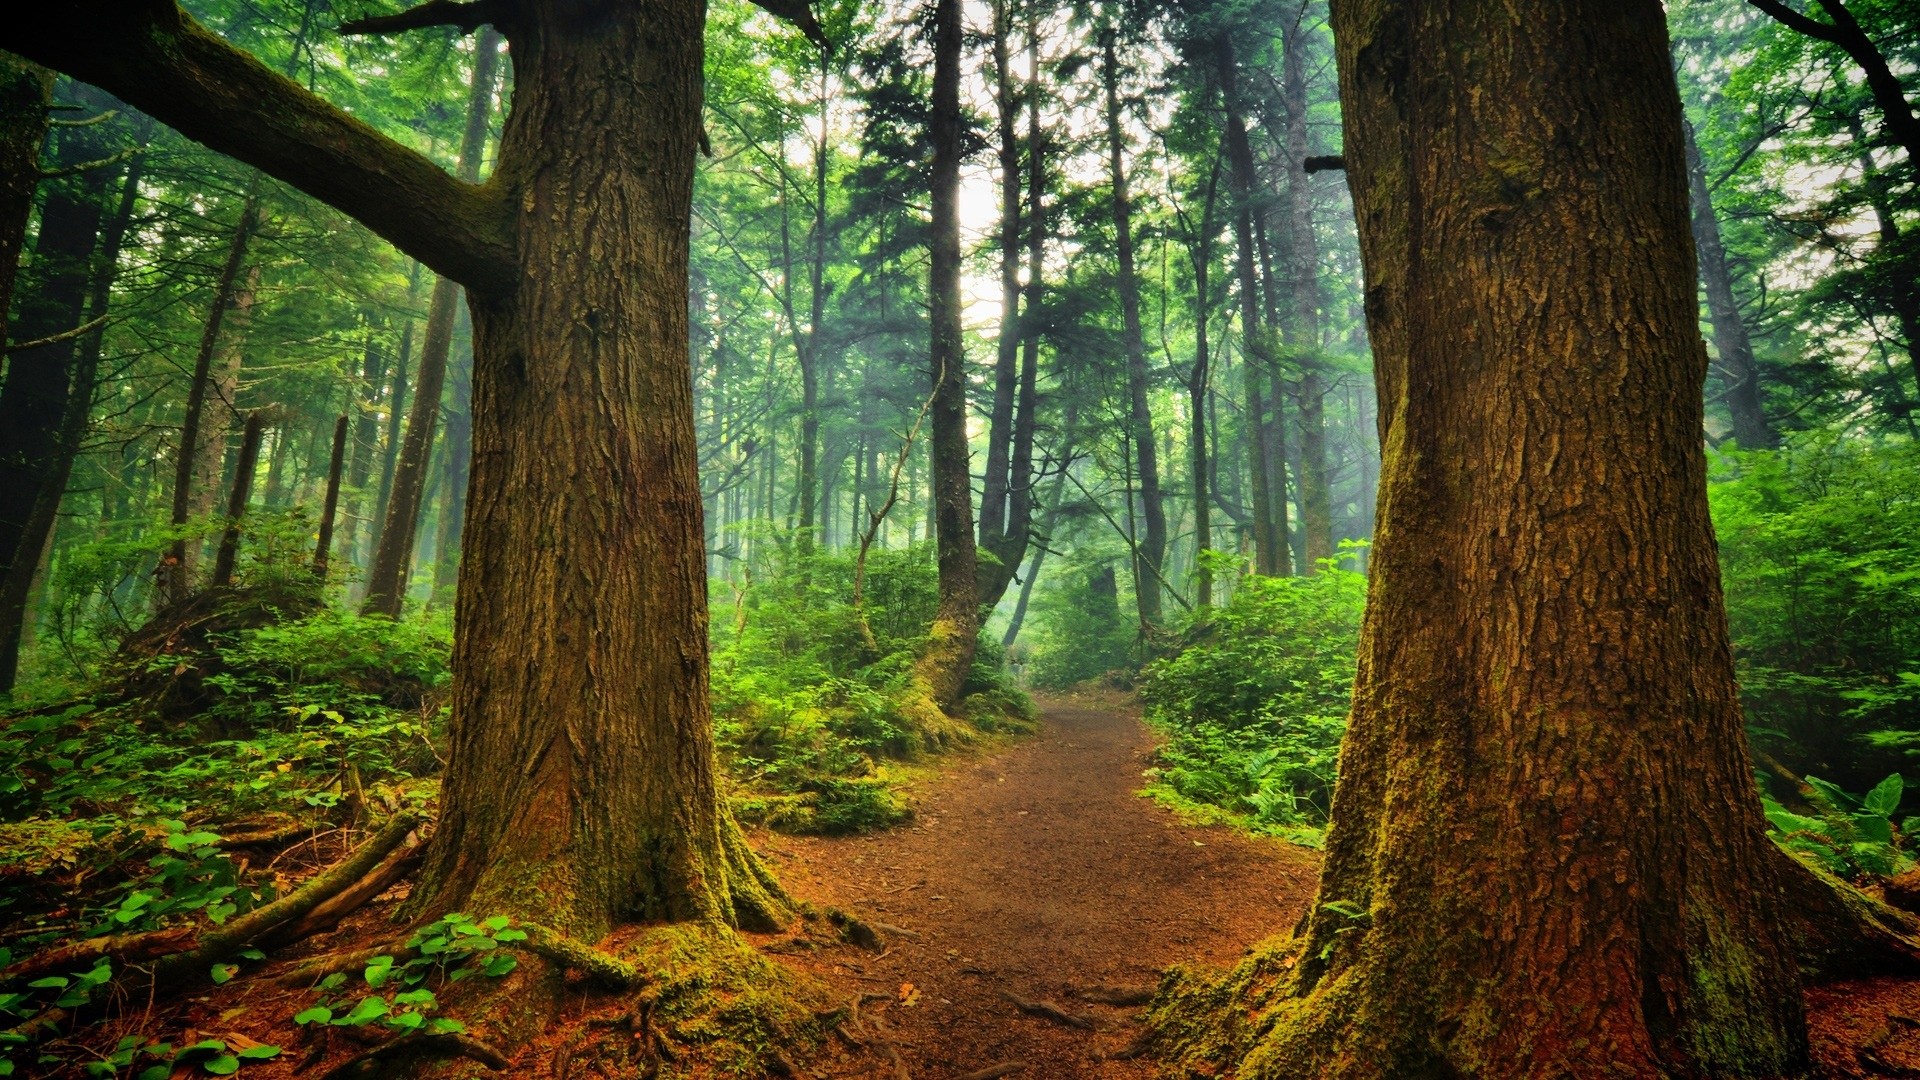 General 1920x1080 nature landscape trees wood forest leaves branch path plants moss mist HDR sunlight